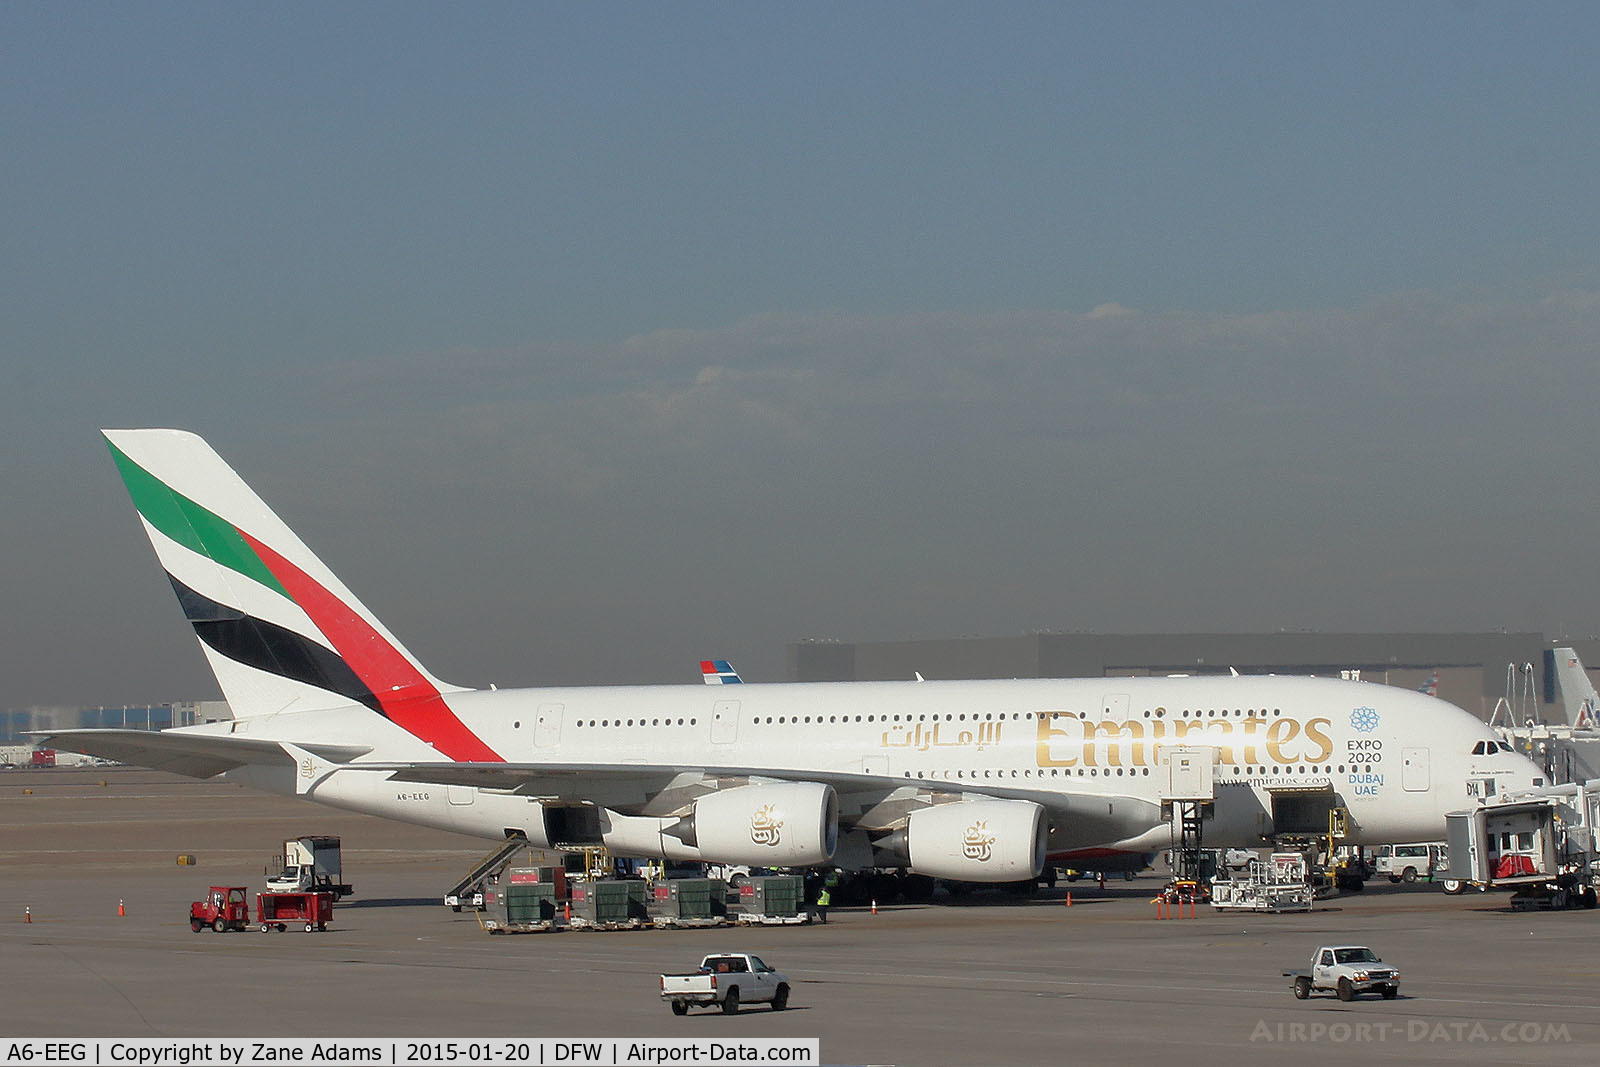 A6-EEG, 2013 Airbus A380-861 C/N 116, Emirates A380 at DFW Airport